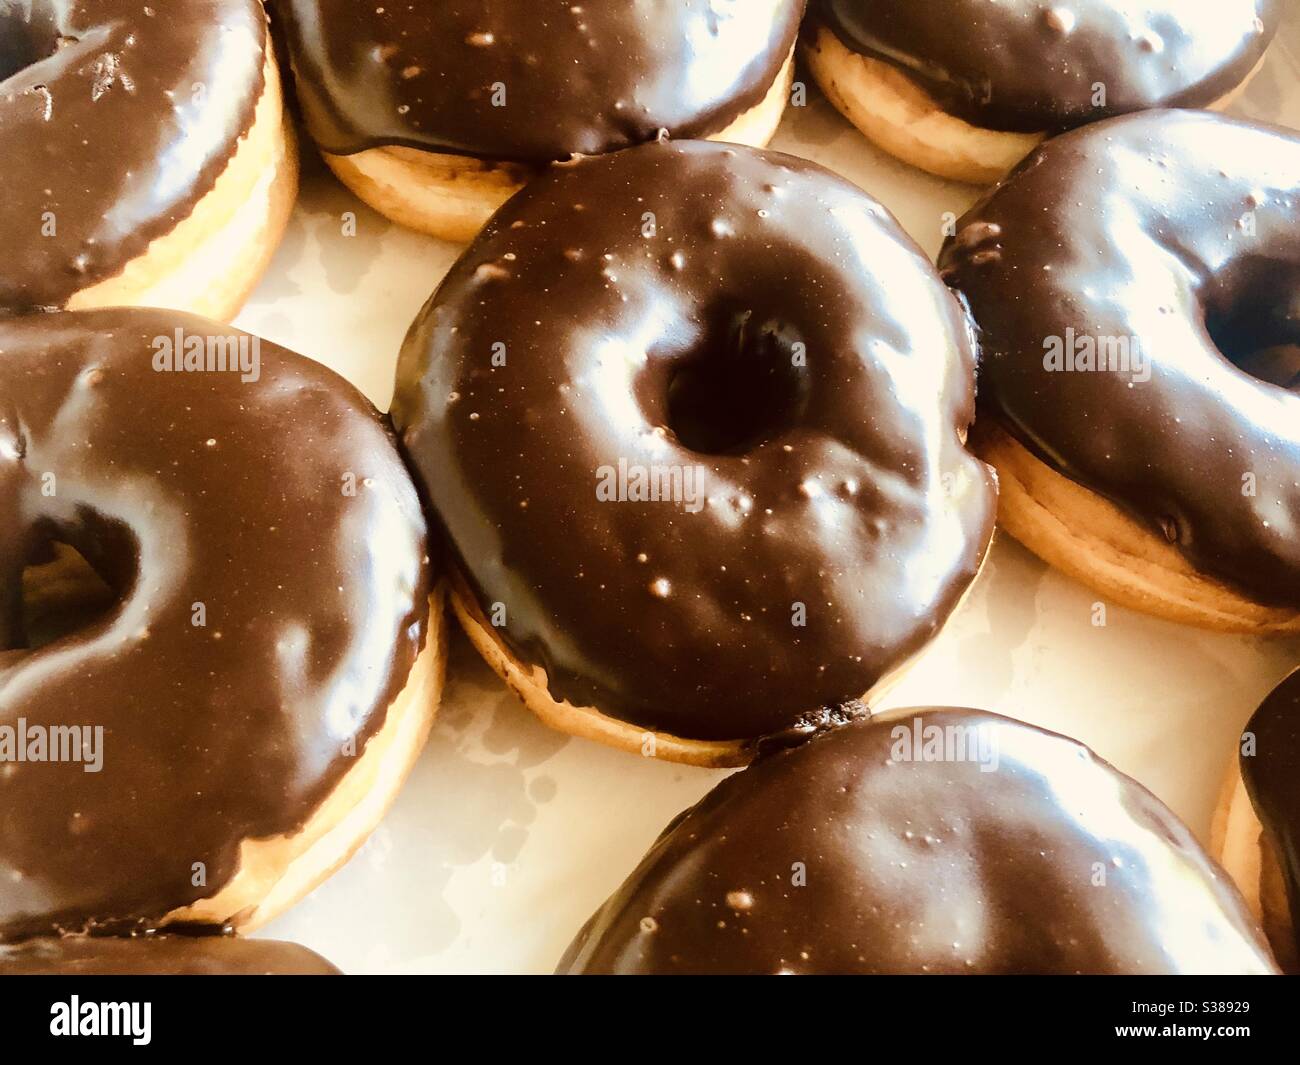 Top view of a full frame of chocolate covered donuts in a white box Stock Photo